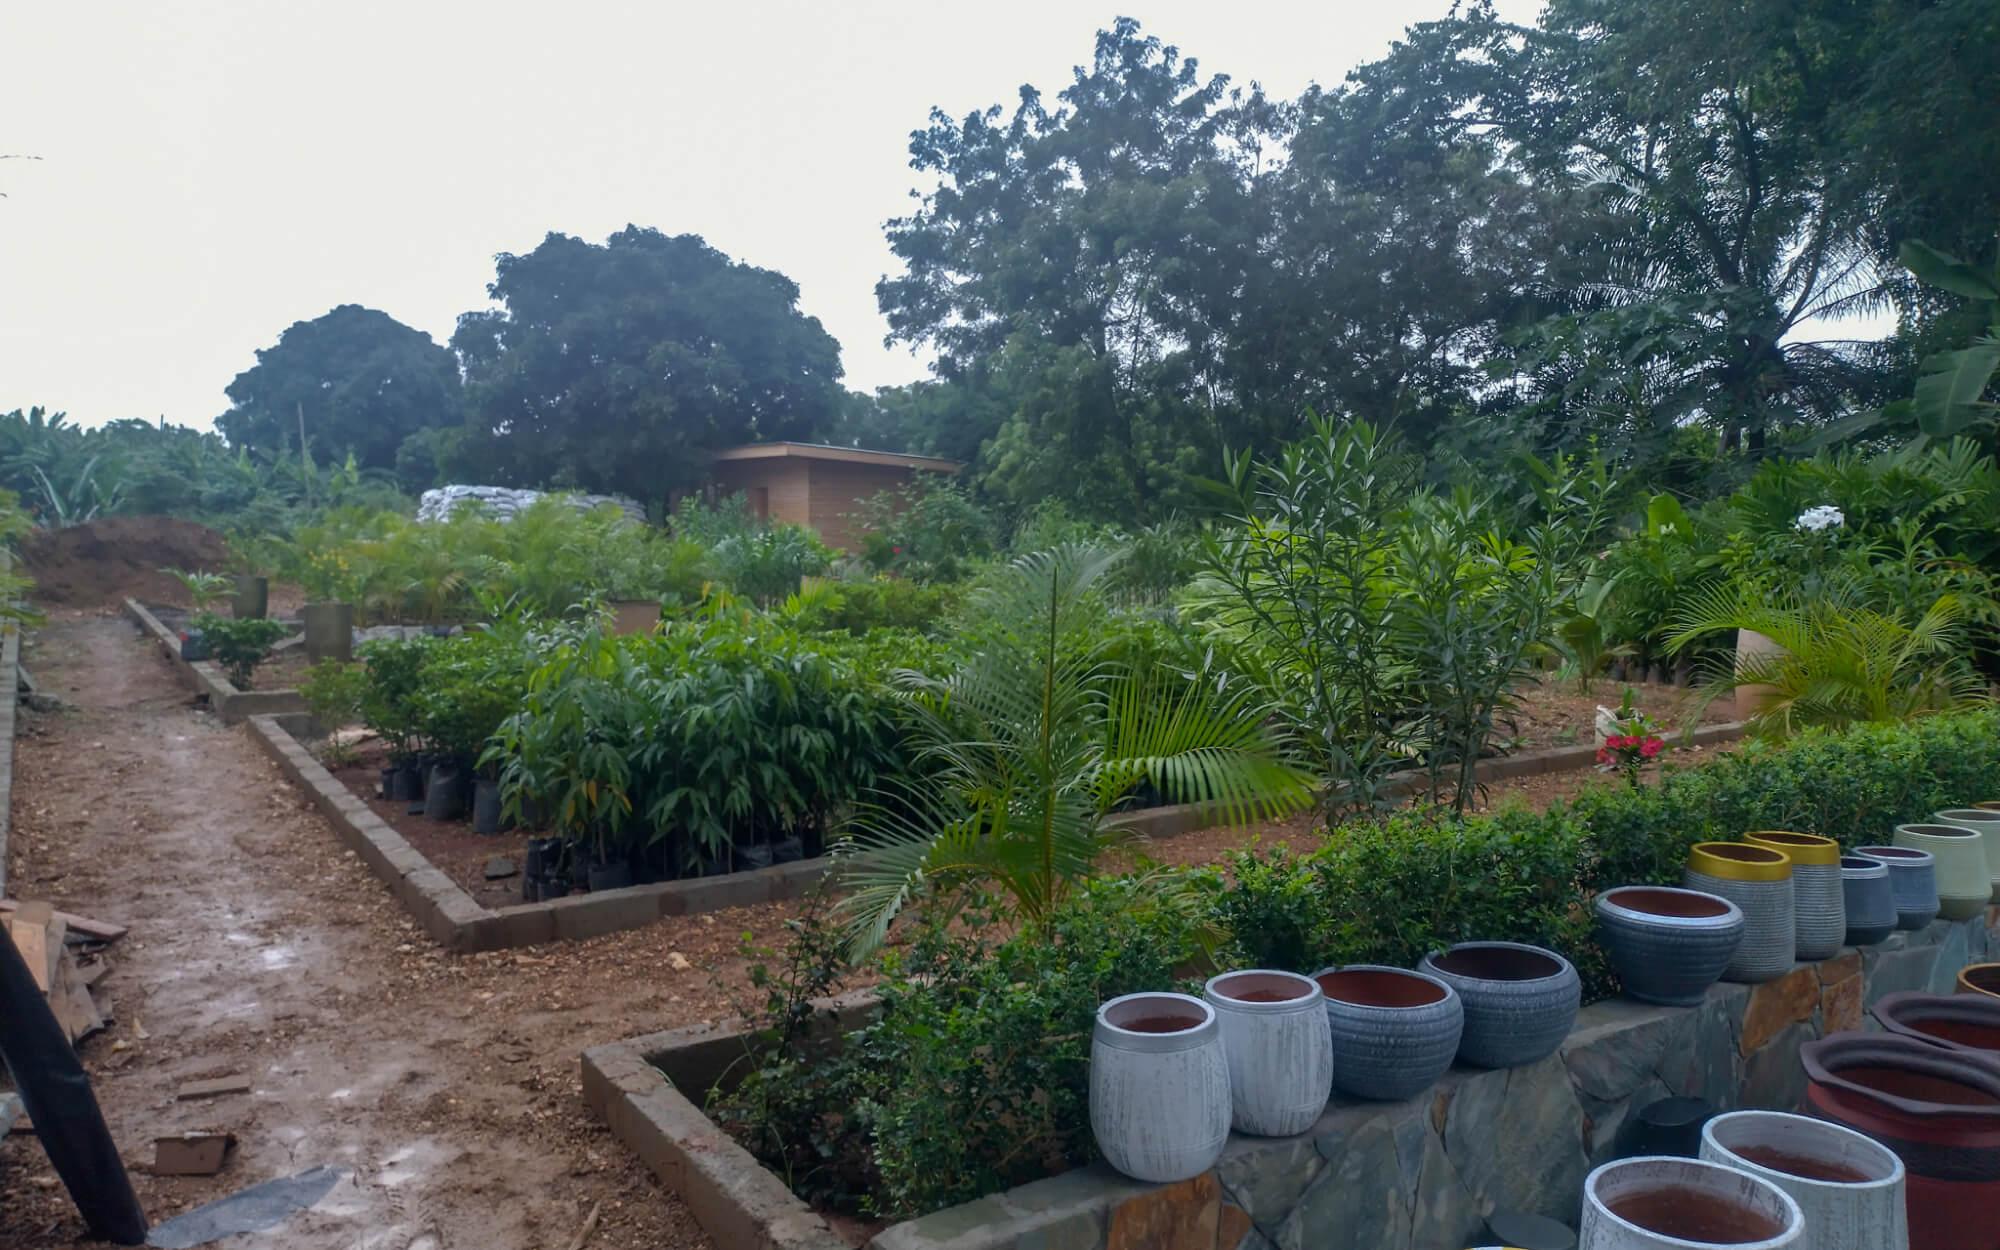 Bringing the verdant landscapes of Ghana’s rural areas into its bustling capital city, Accra, is one of Hobson’s primary goals. 
Photographer: The Green Diversity Foundation